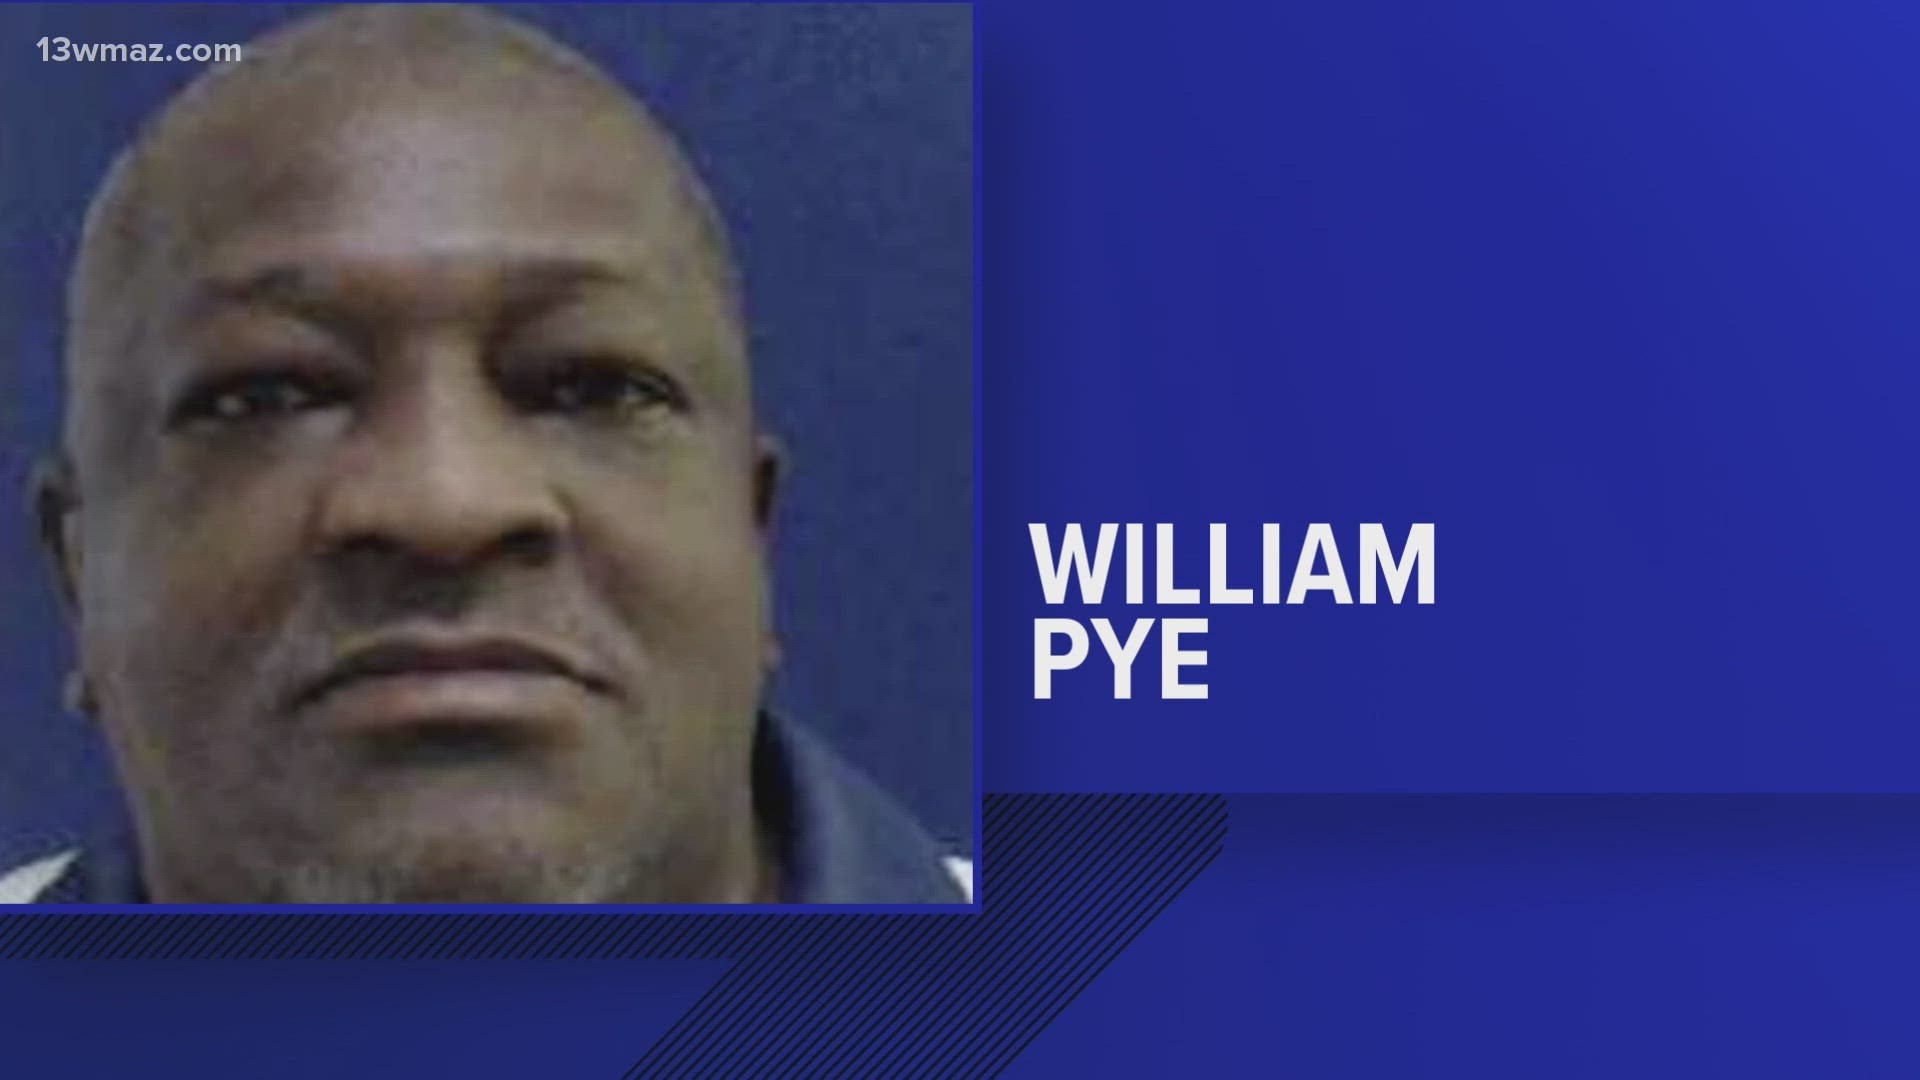 Pye is set to be executed in Jackson for killing a former girlfriend in Griffin back in 1993.